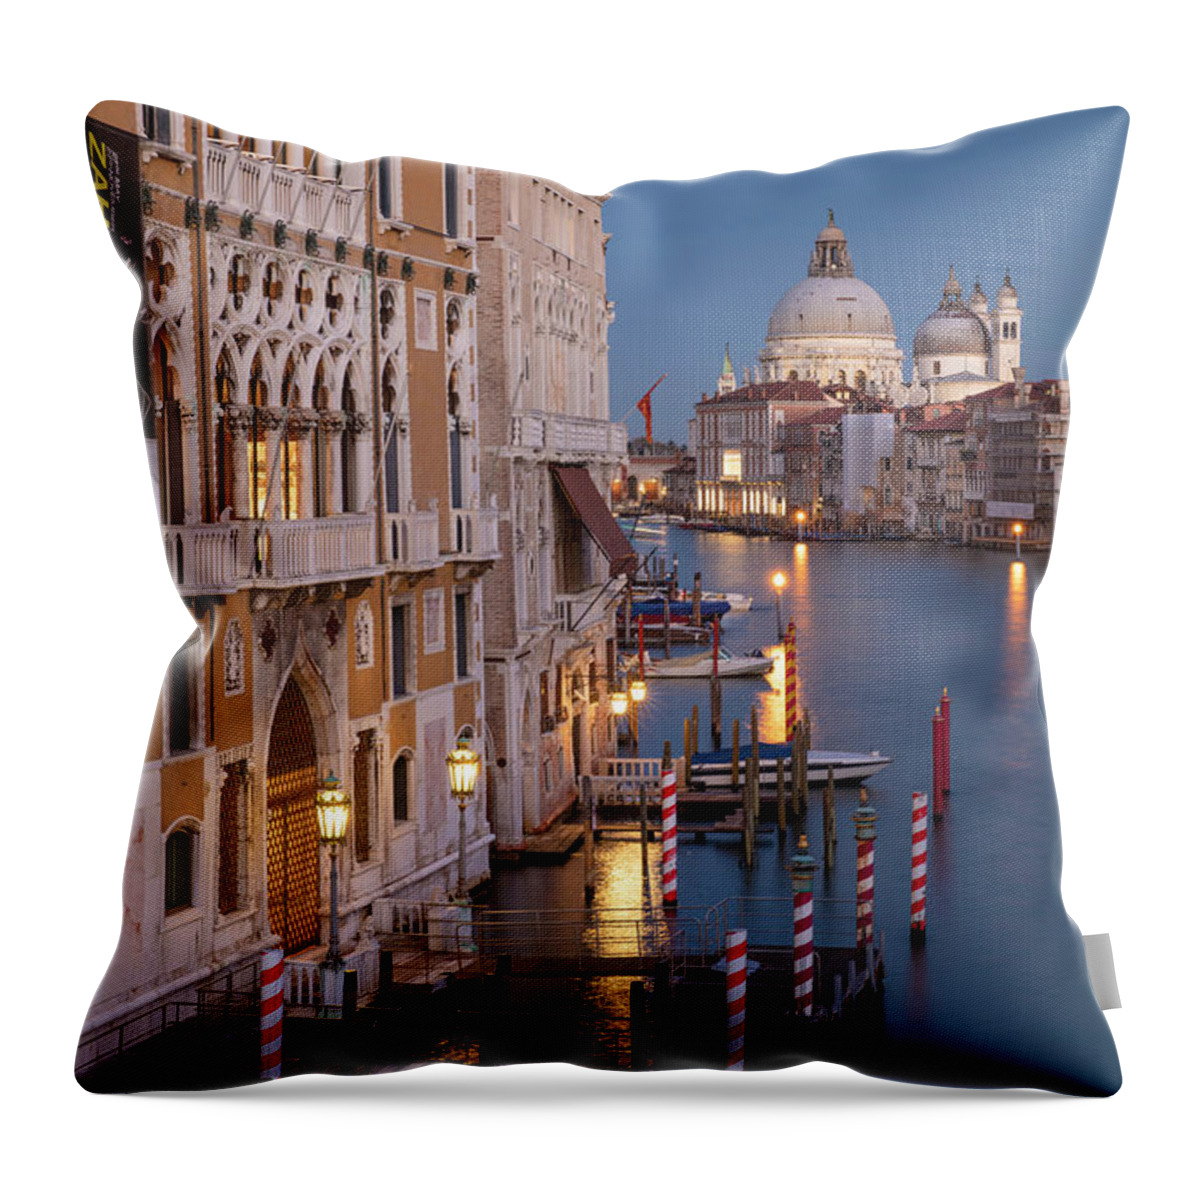 Venice Throw Pillow featuring the photograph Grand Canal Twilight II by Brian Jannsen